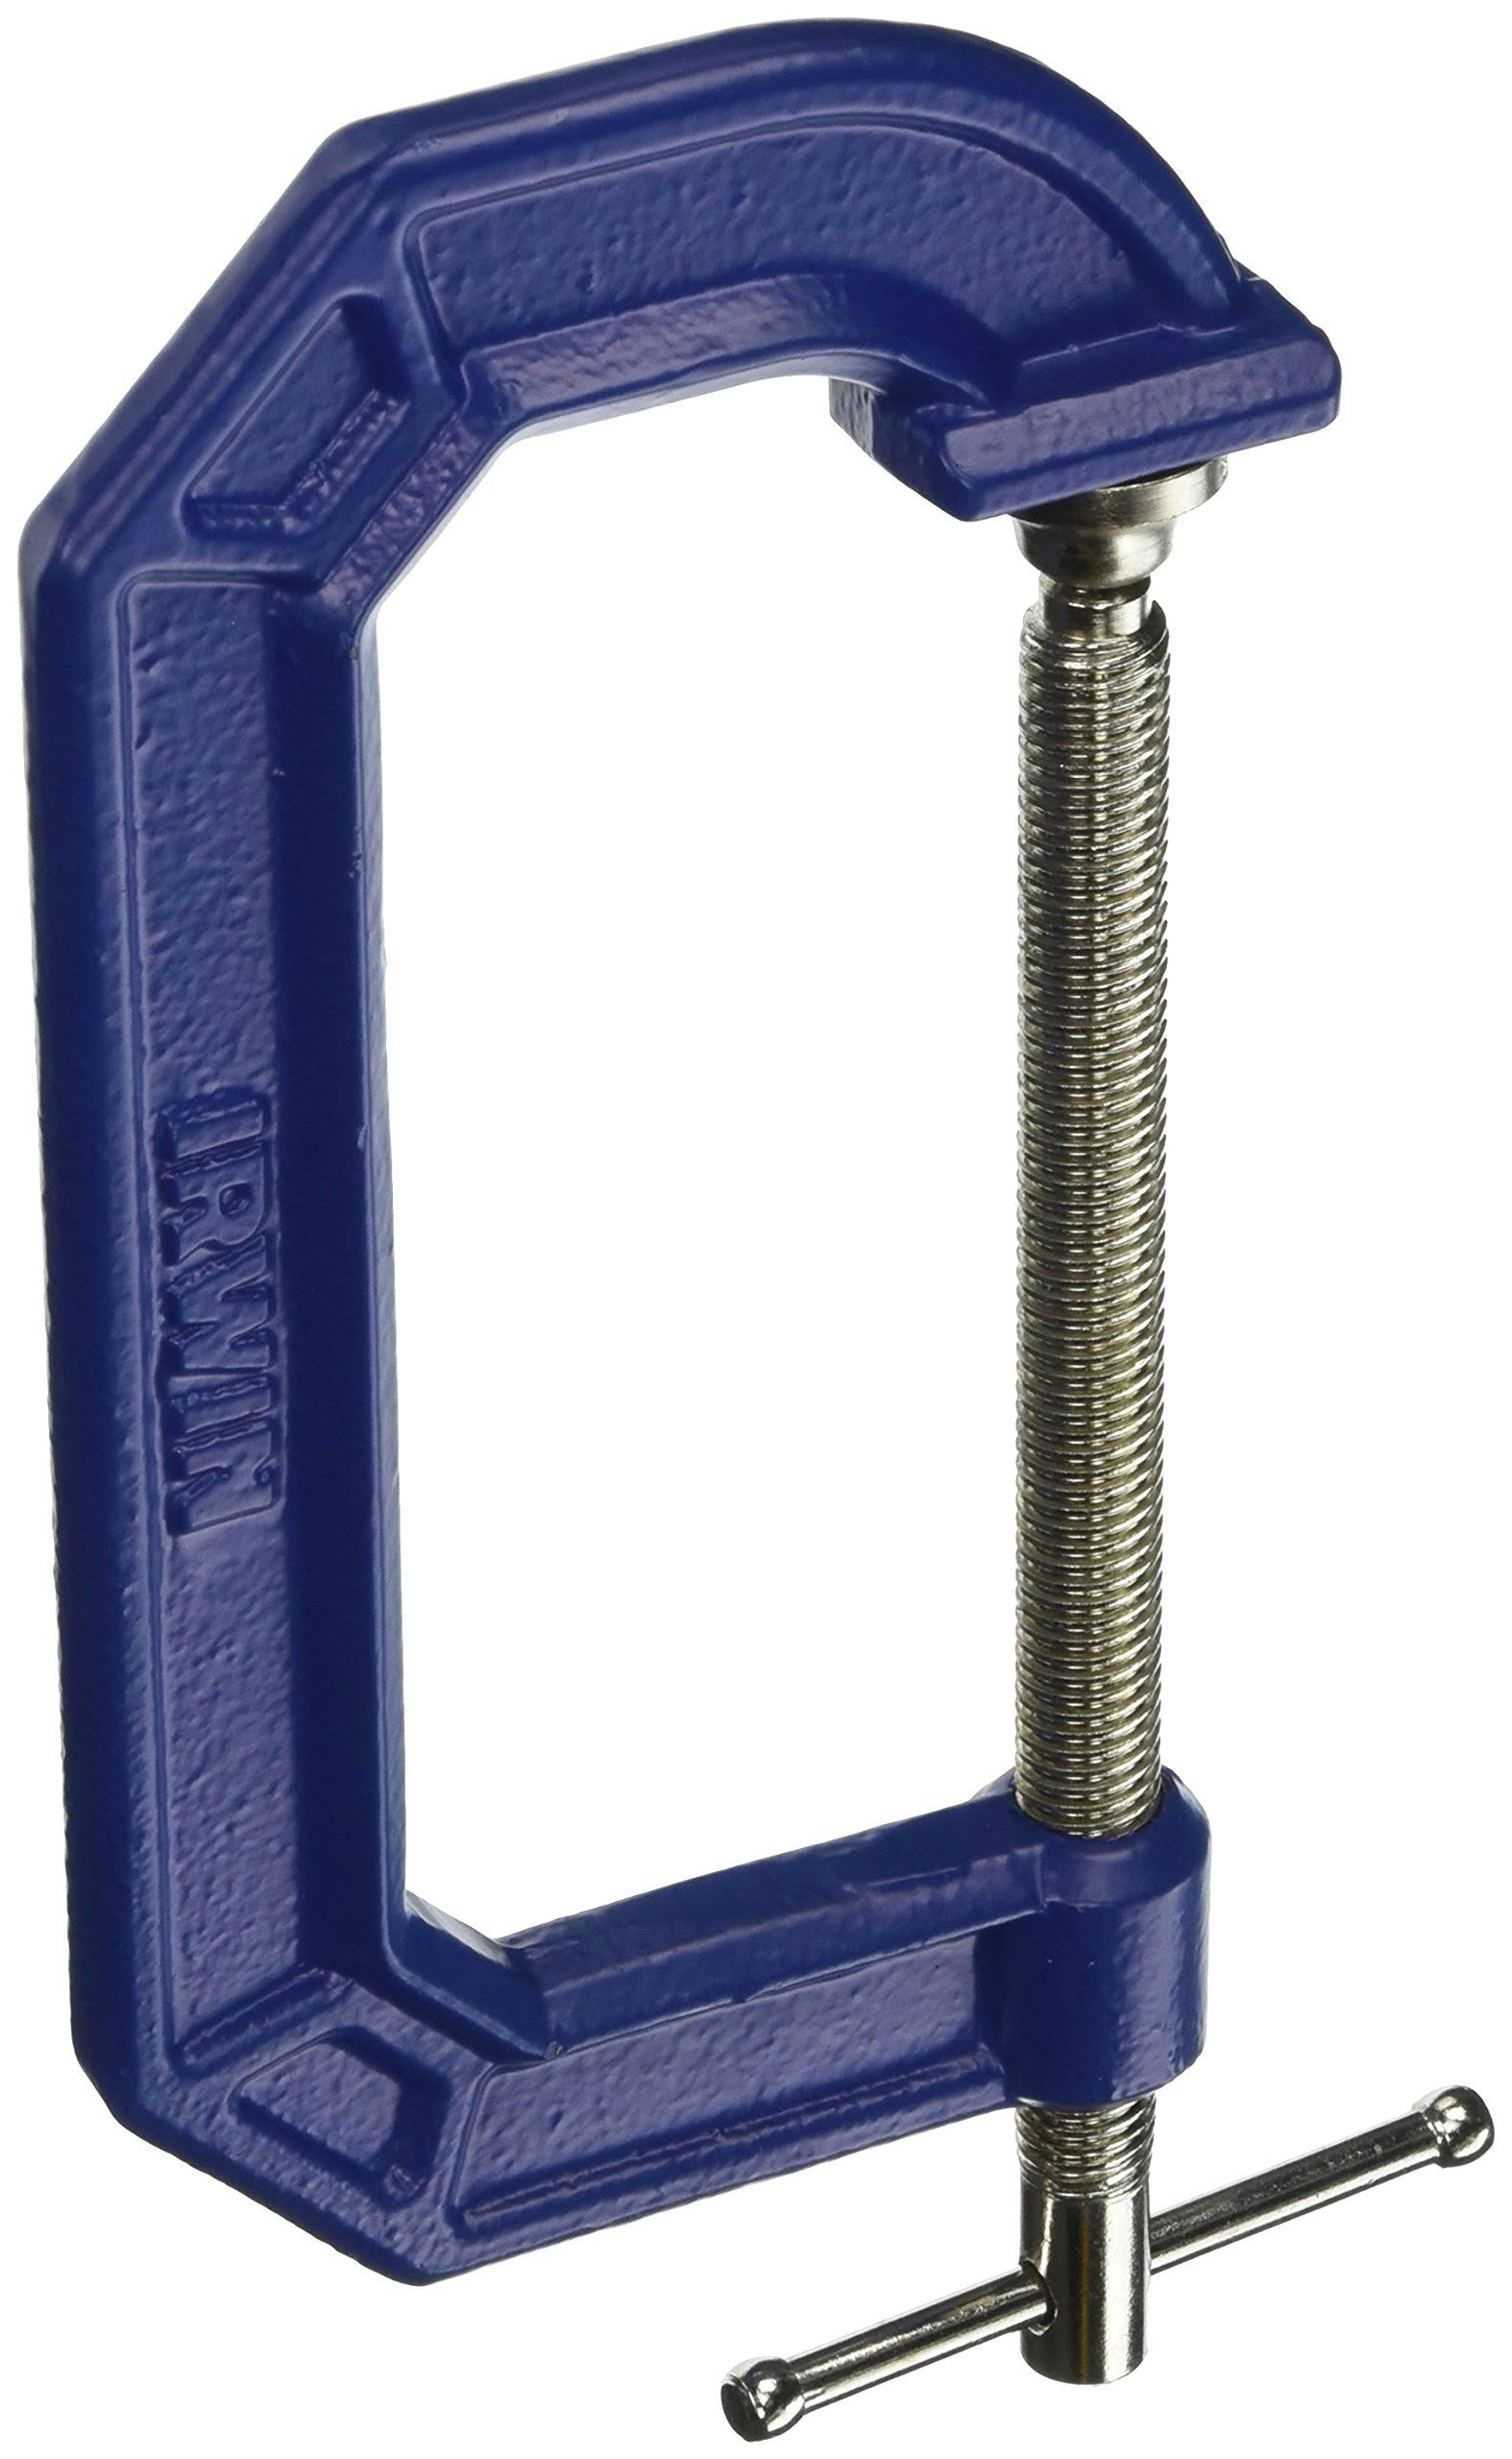 Irwin Double Rolled Thread Quick Grip C Clamp - 5"